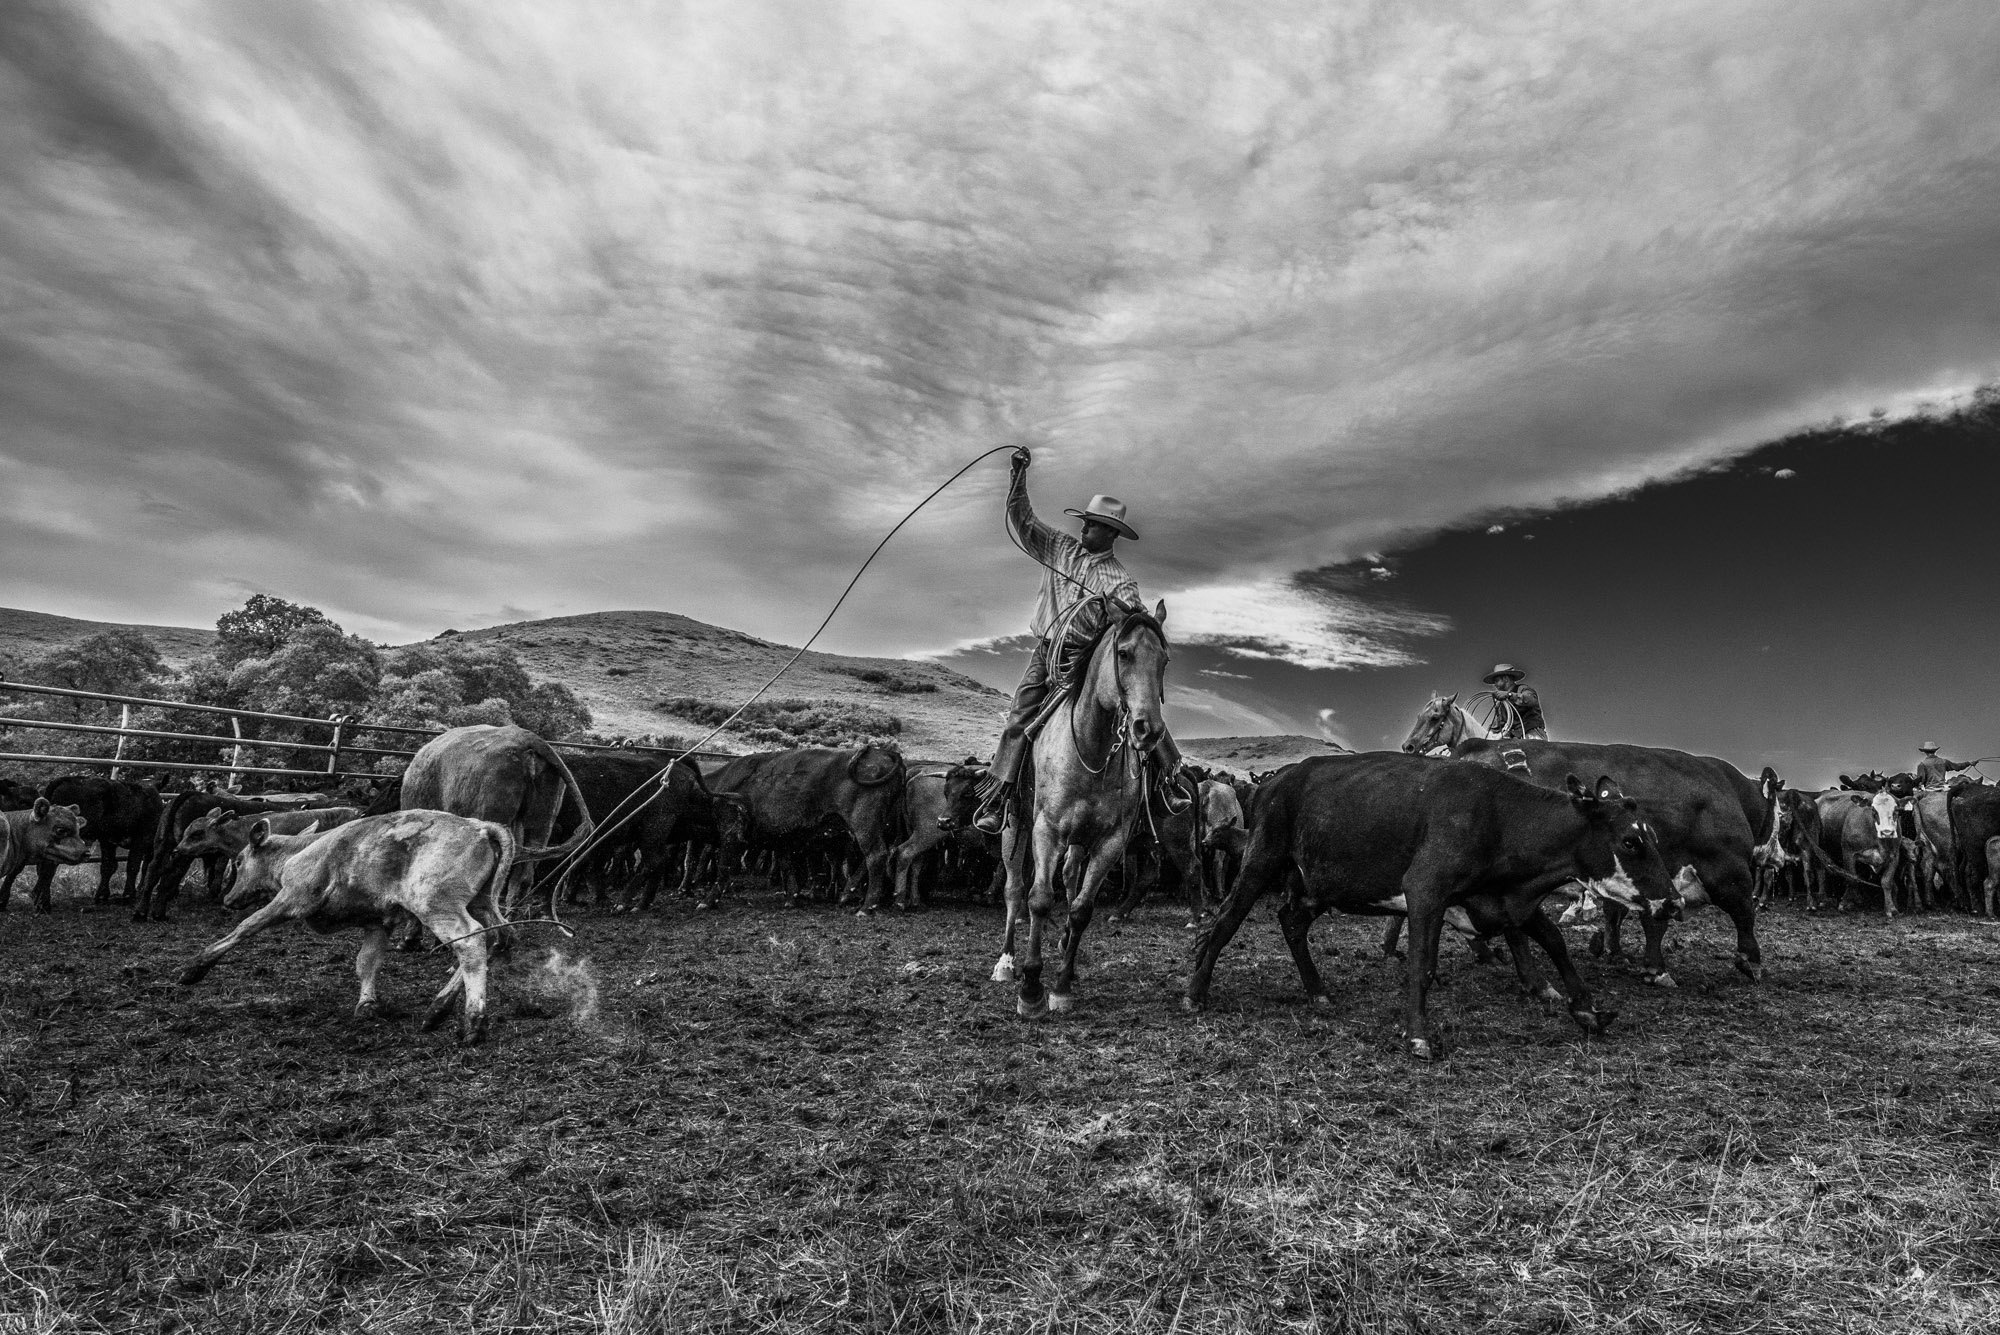 Fine Art Limited Edition Photo Prints of Cowboys, Horses, and life in the West. Anyway A Cowboy picture in black and white. This...